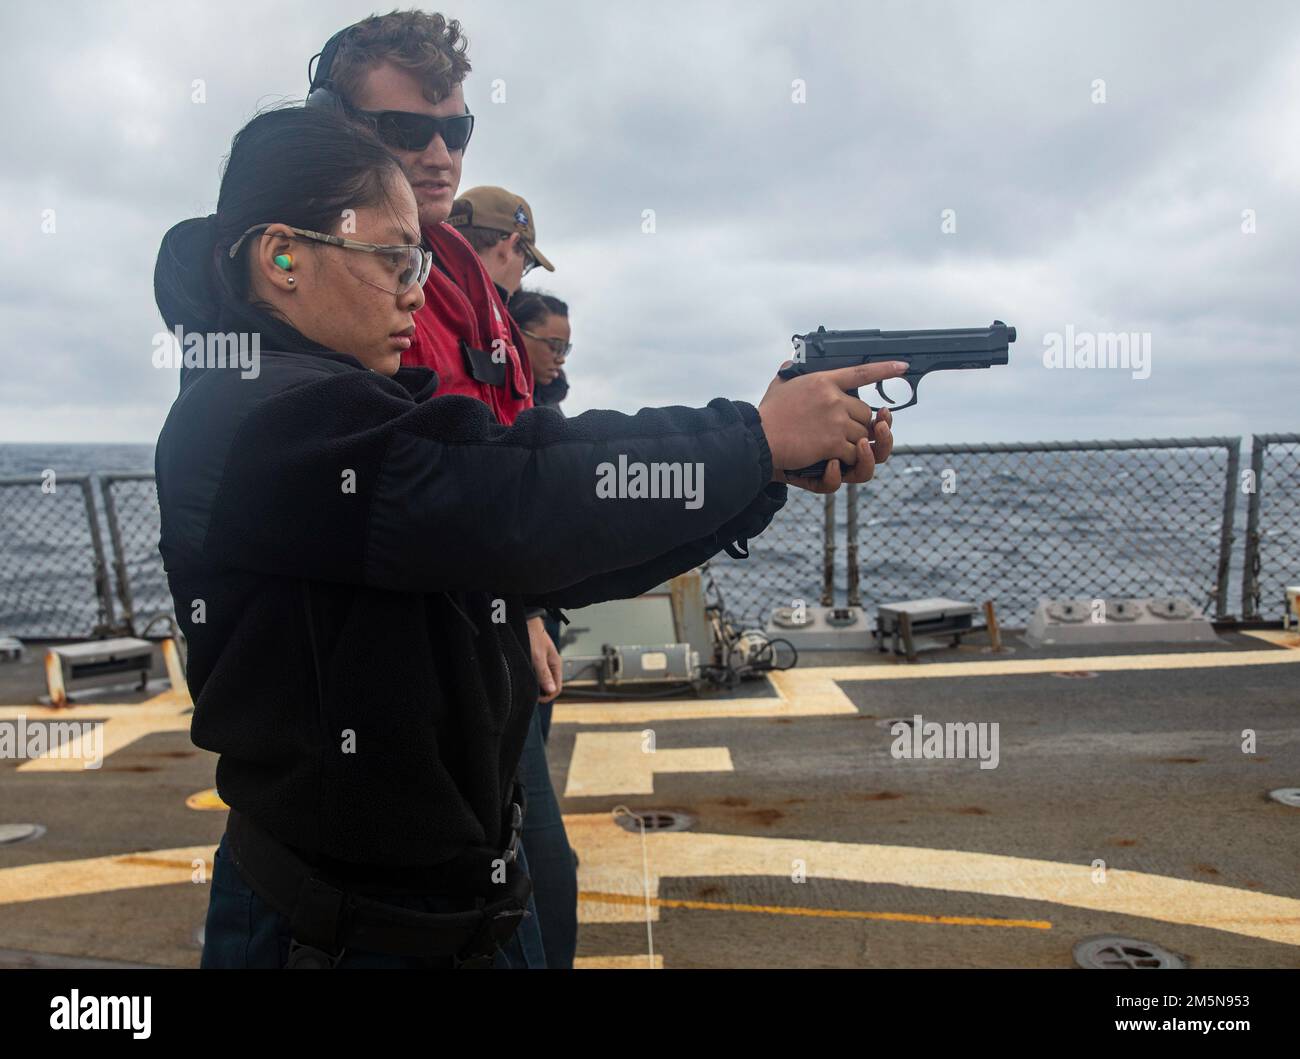 EAST CHINA SEA (March 28,2022) Operations Specialist Seaman Htee Shee, from Laverne, Tennessee, shoots a 9mm pistol during a small-arms live-fire qualification aboard the Arleigh Burke-class guided-missile destroyer USS Ralph Johnson (DDG 114). Ralph Johnson is forward-deployed to the U.S. 7th Fleet area of operations in support of a free and open Indo-Pacific. Stock Photo